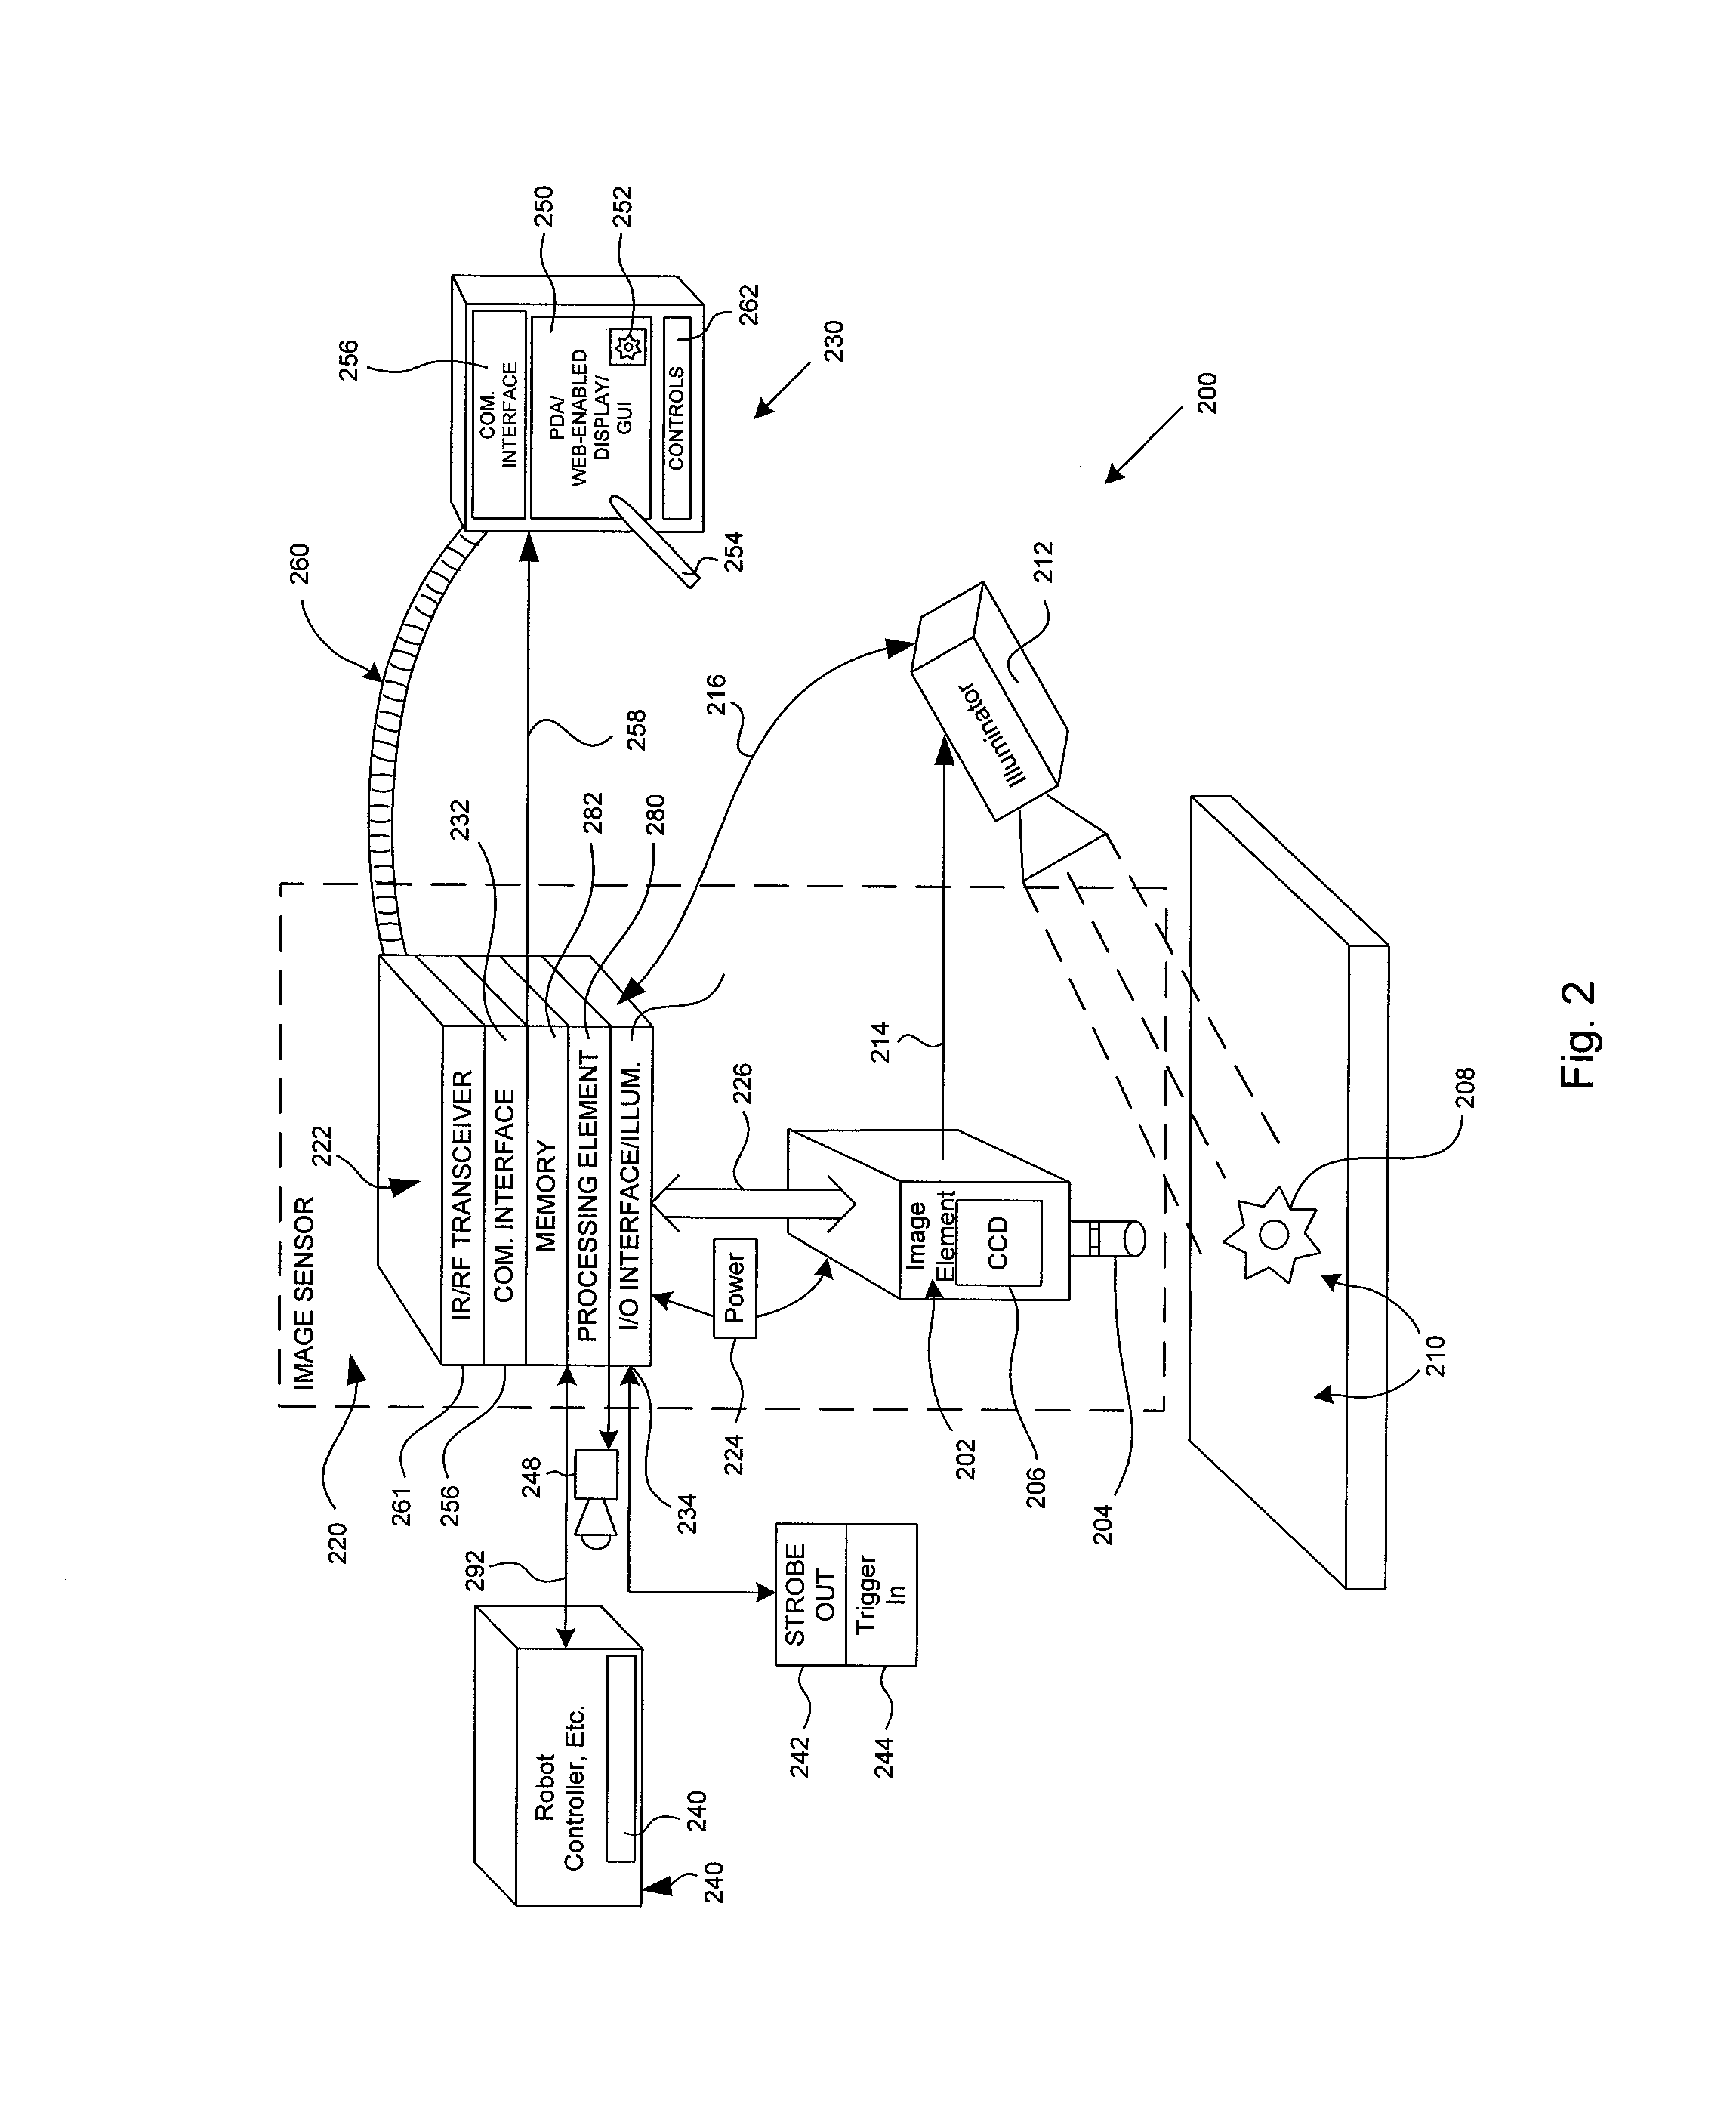 Human/machine interface for a machine vision sensor and method for installing and operating the same